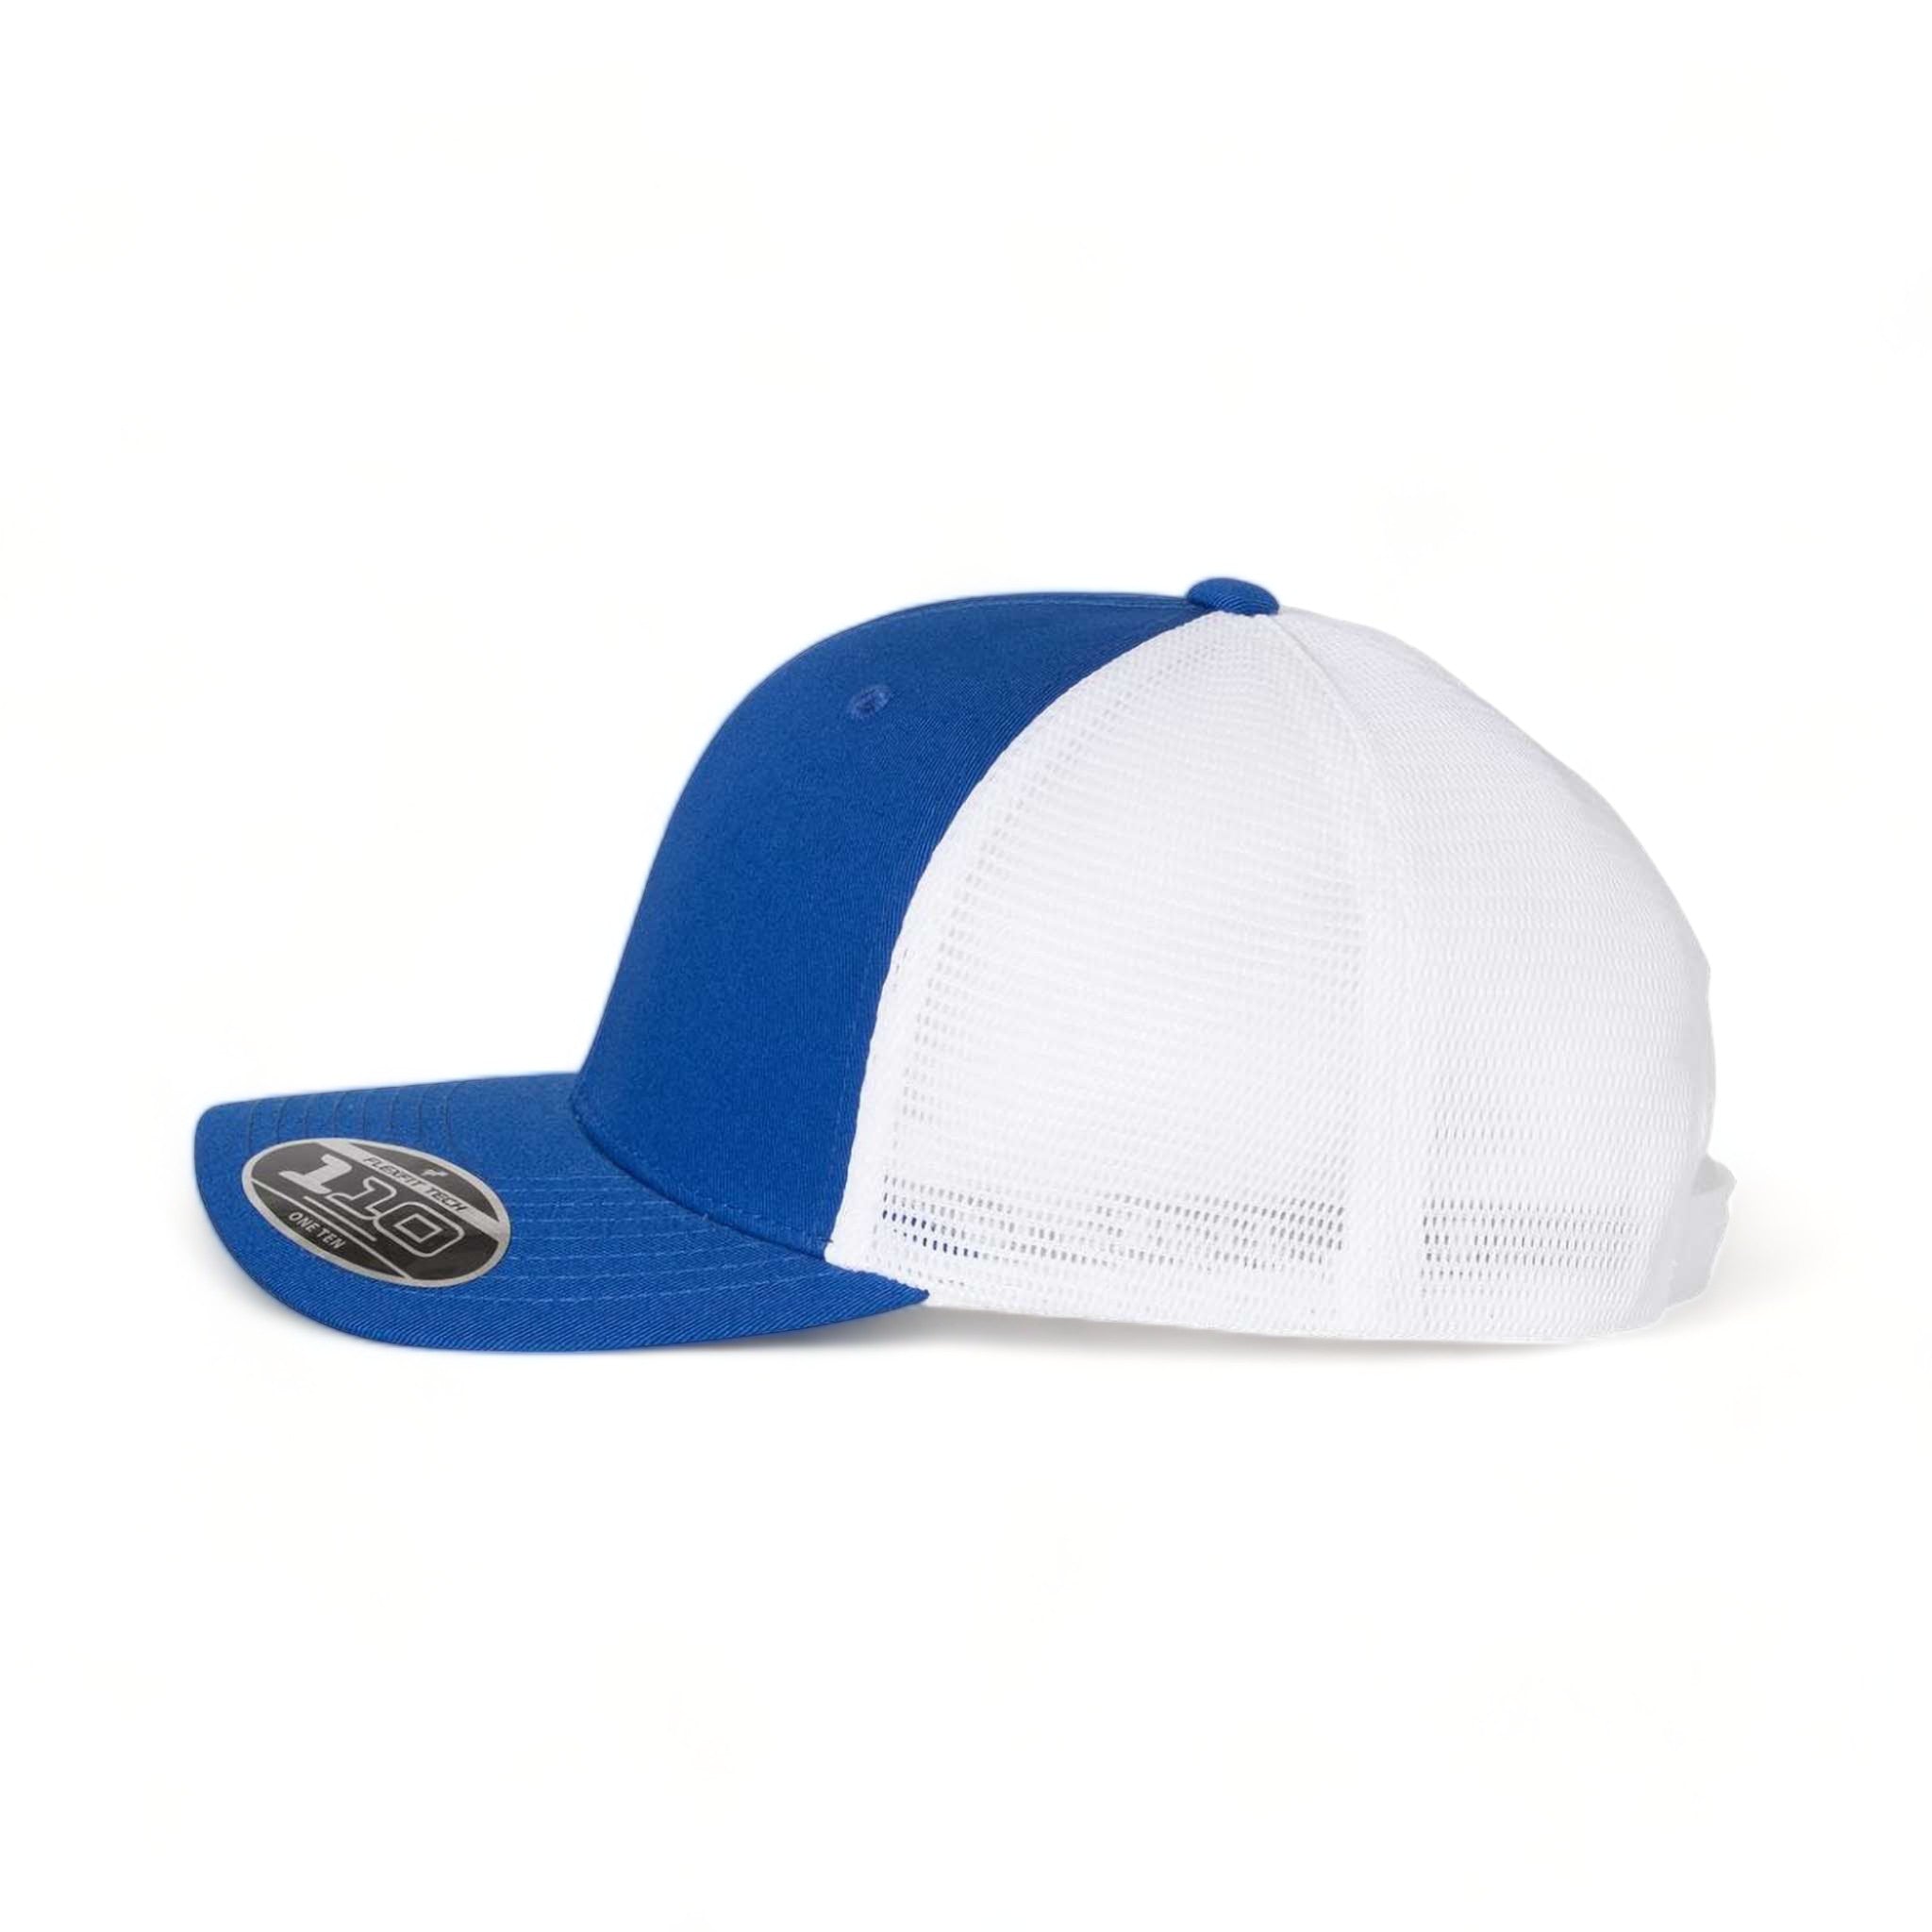 Side view of Flexfit 110M custom hat in royal and white